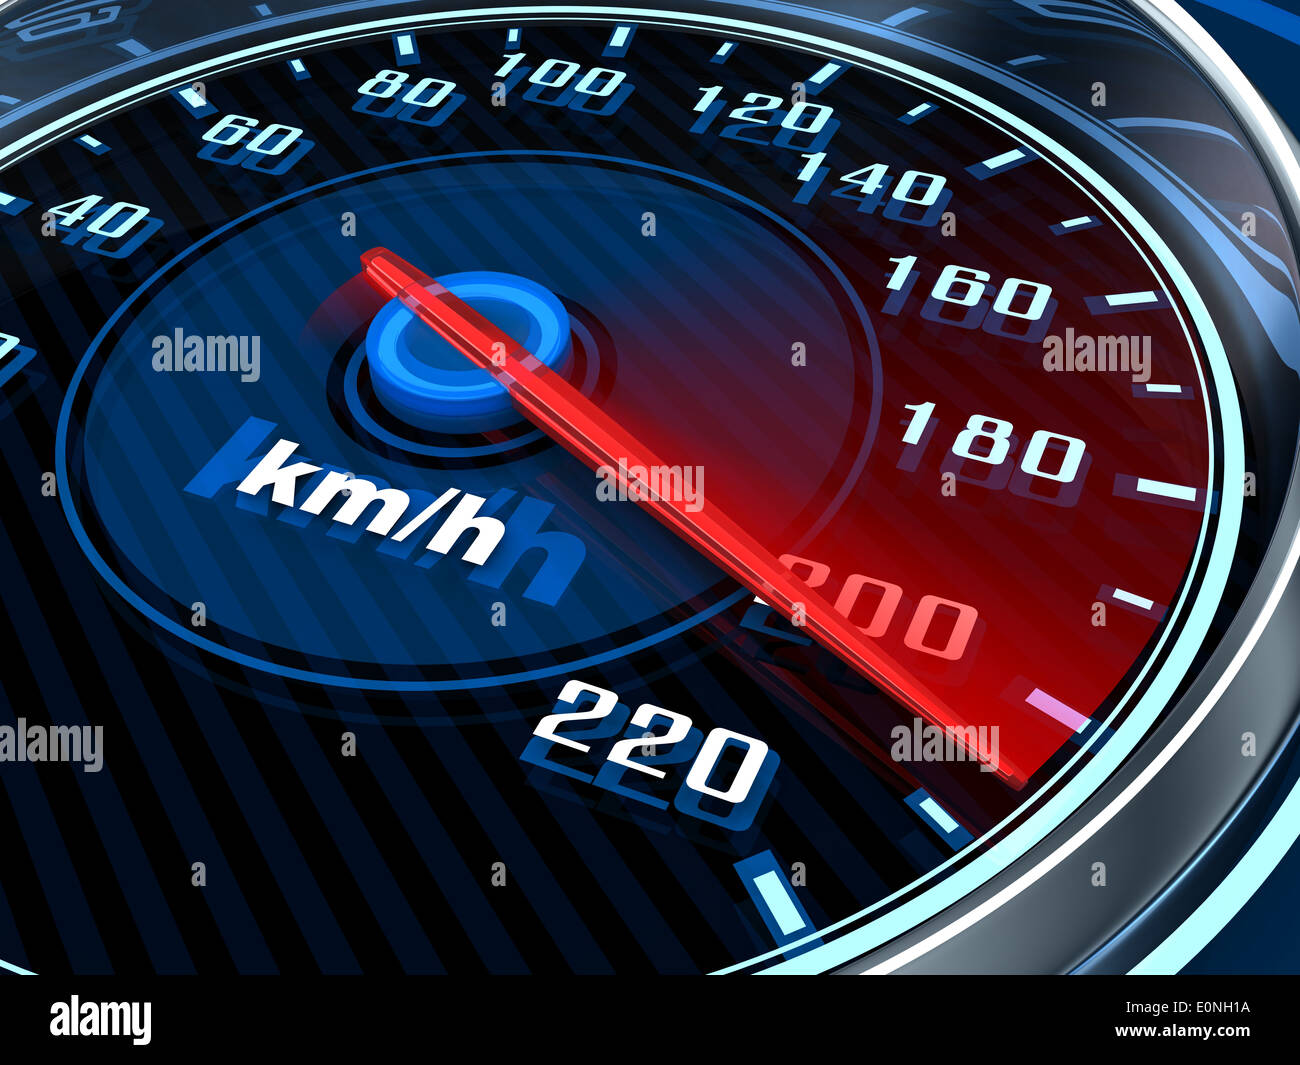 Download Speedometer Live Wallpaper HD APK 1.7 Latest Version for Android  at APKFab